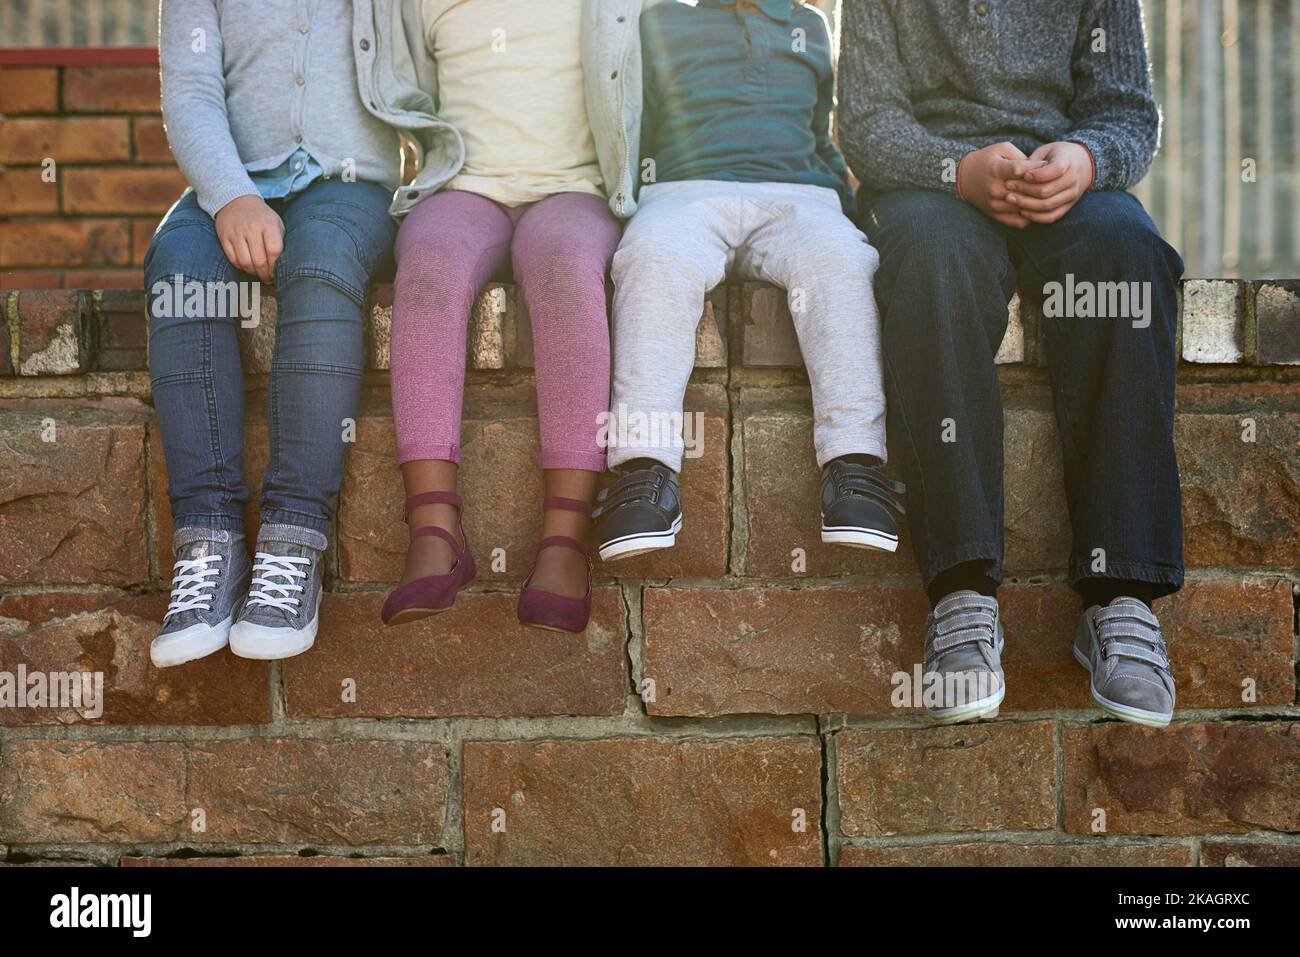 They belong to the school of cool. a group of unrecognizable elementary school kids sitting on a brick wall outside. Stock Photo